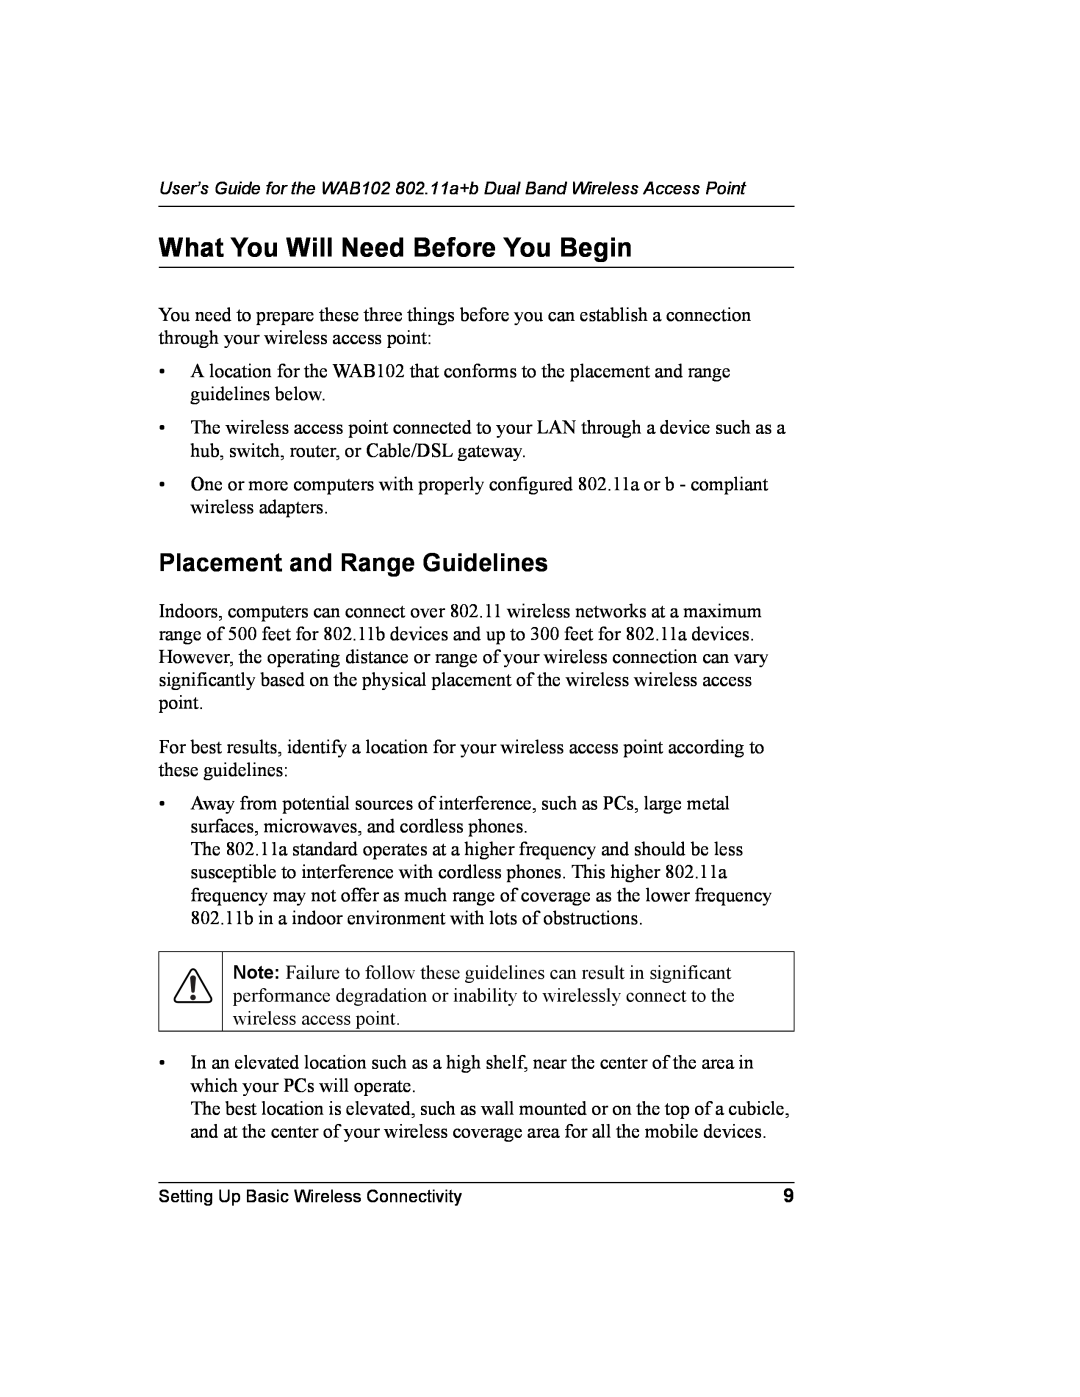 NETGEAR WAB102 manual What You Will Need Before You Begin, Placement and Range Guidelines 